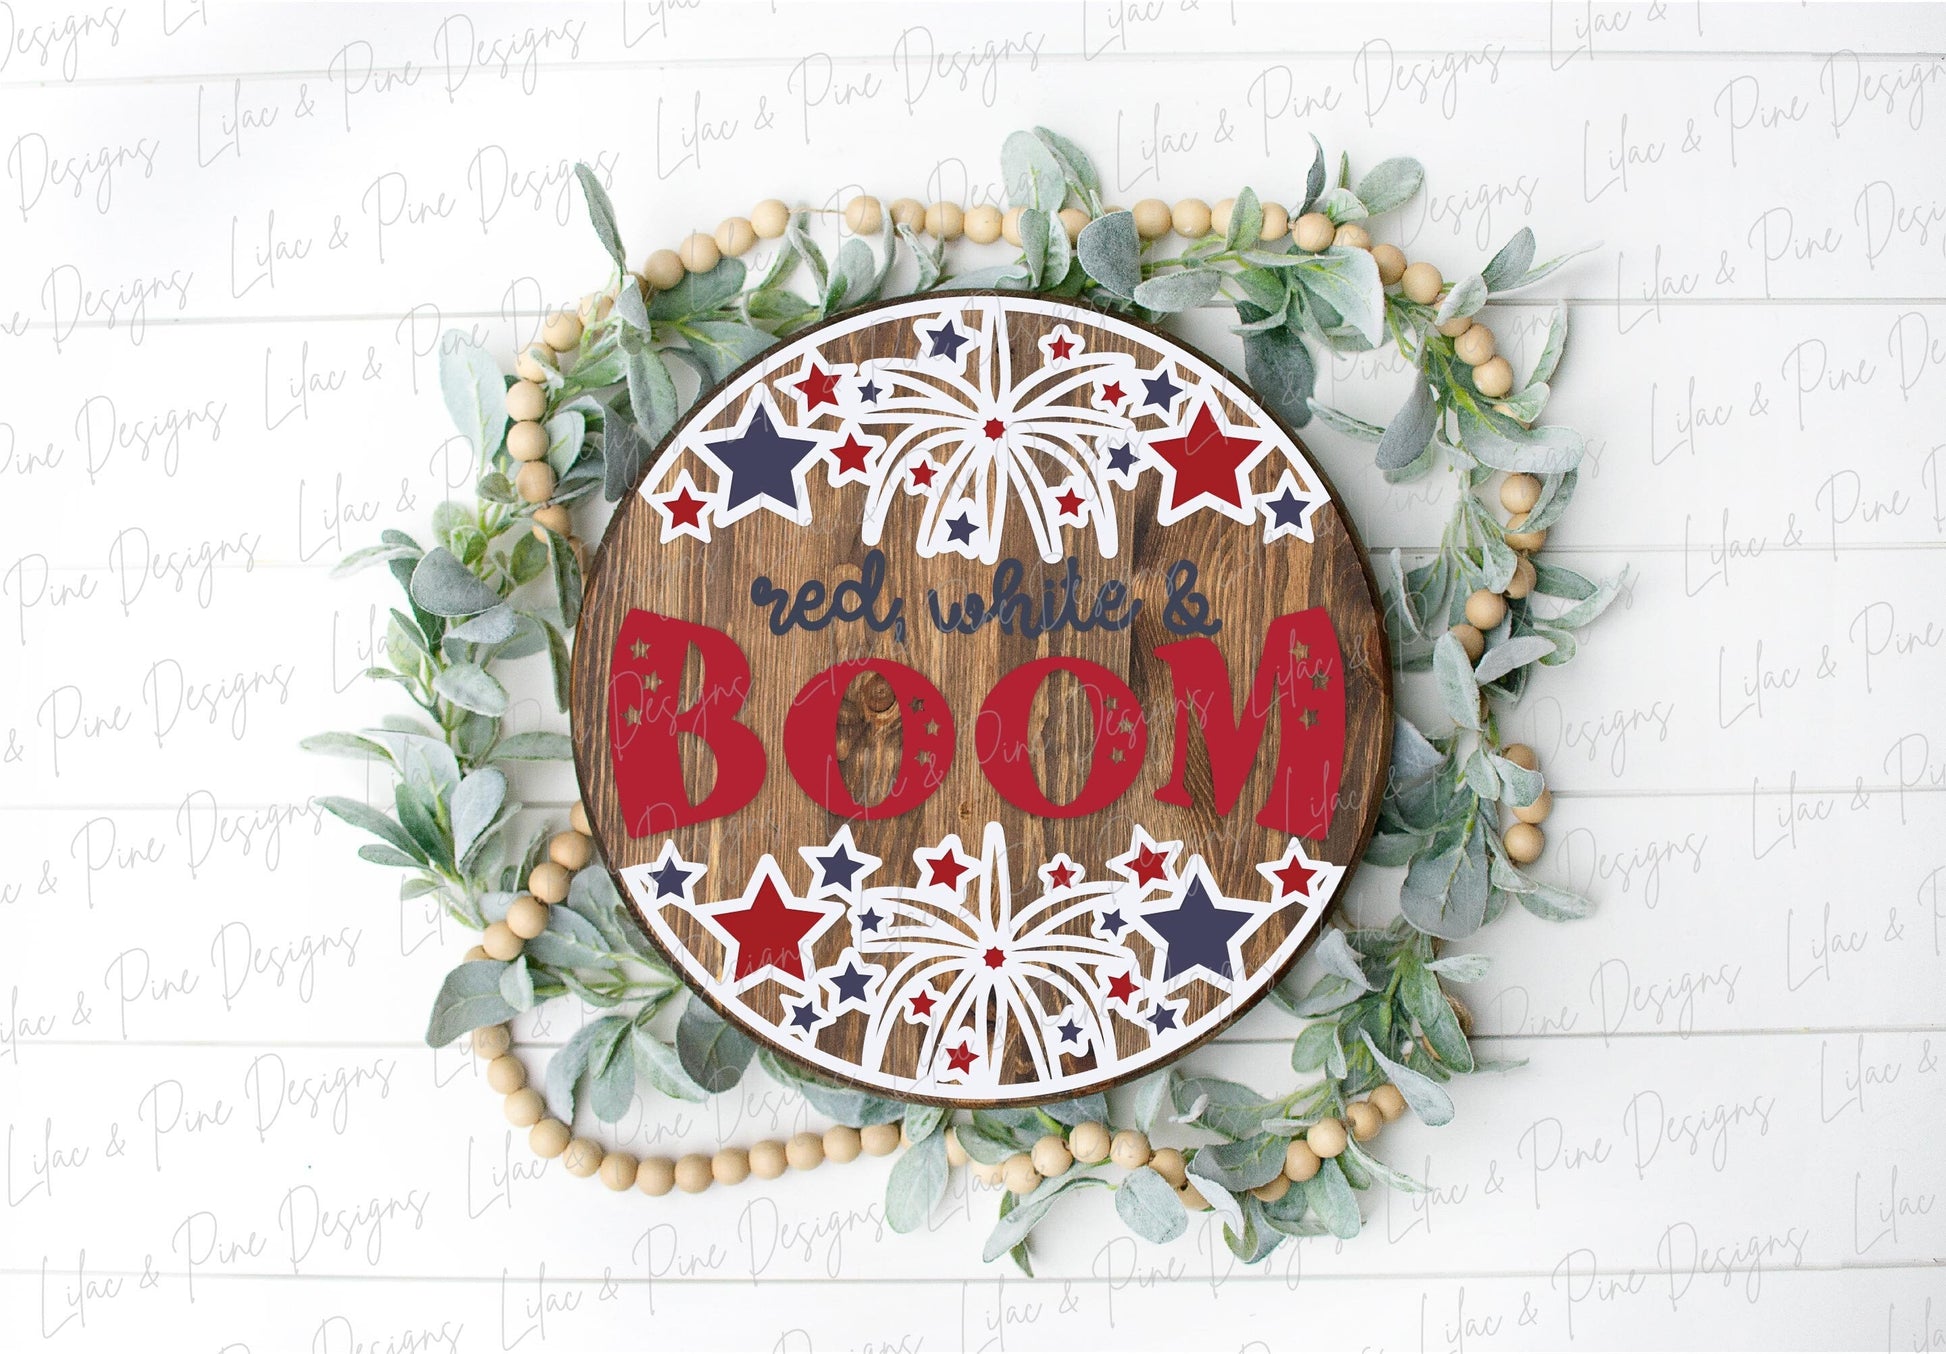 Red White and Boom SVG, Firework welcome sign SVG, 4th of July door hanger, Fourth of July round wood sign, Glowforge SVG, laser cut file